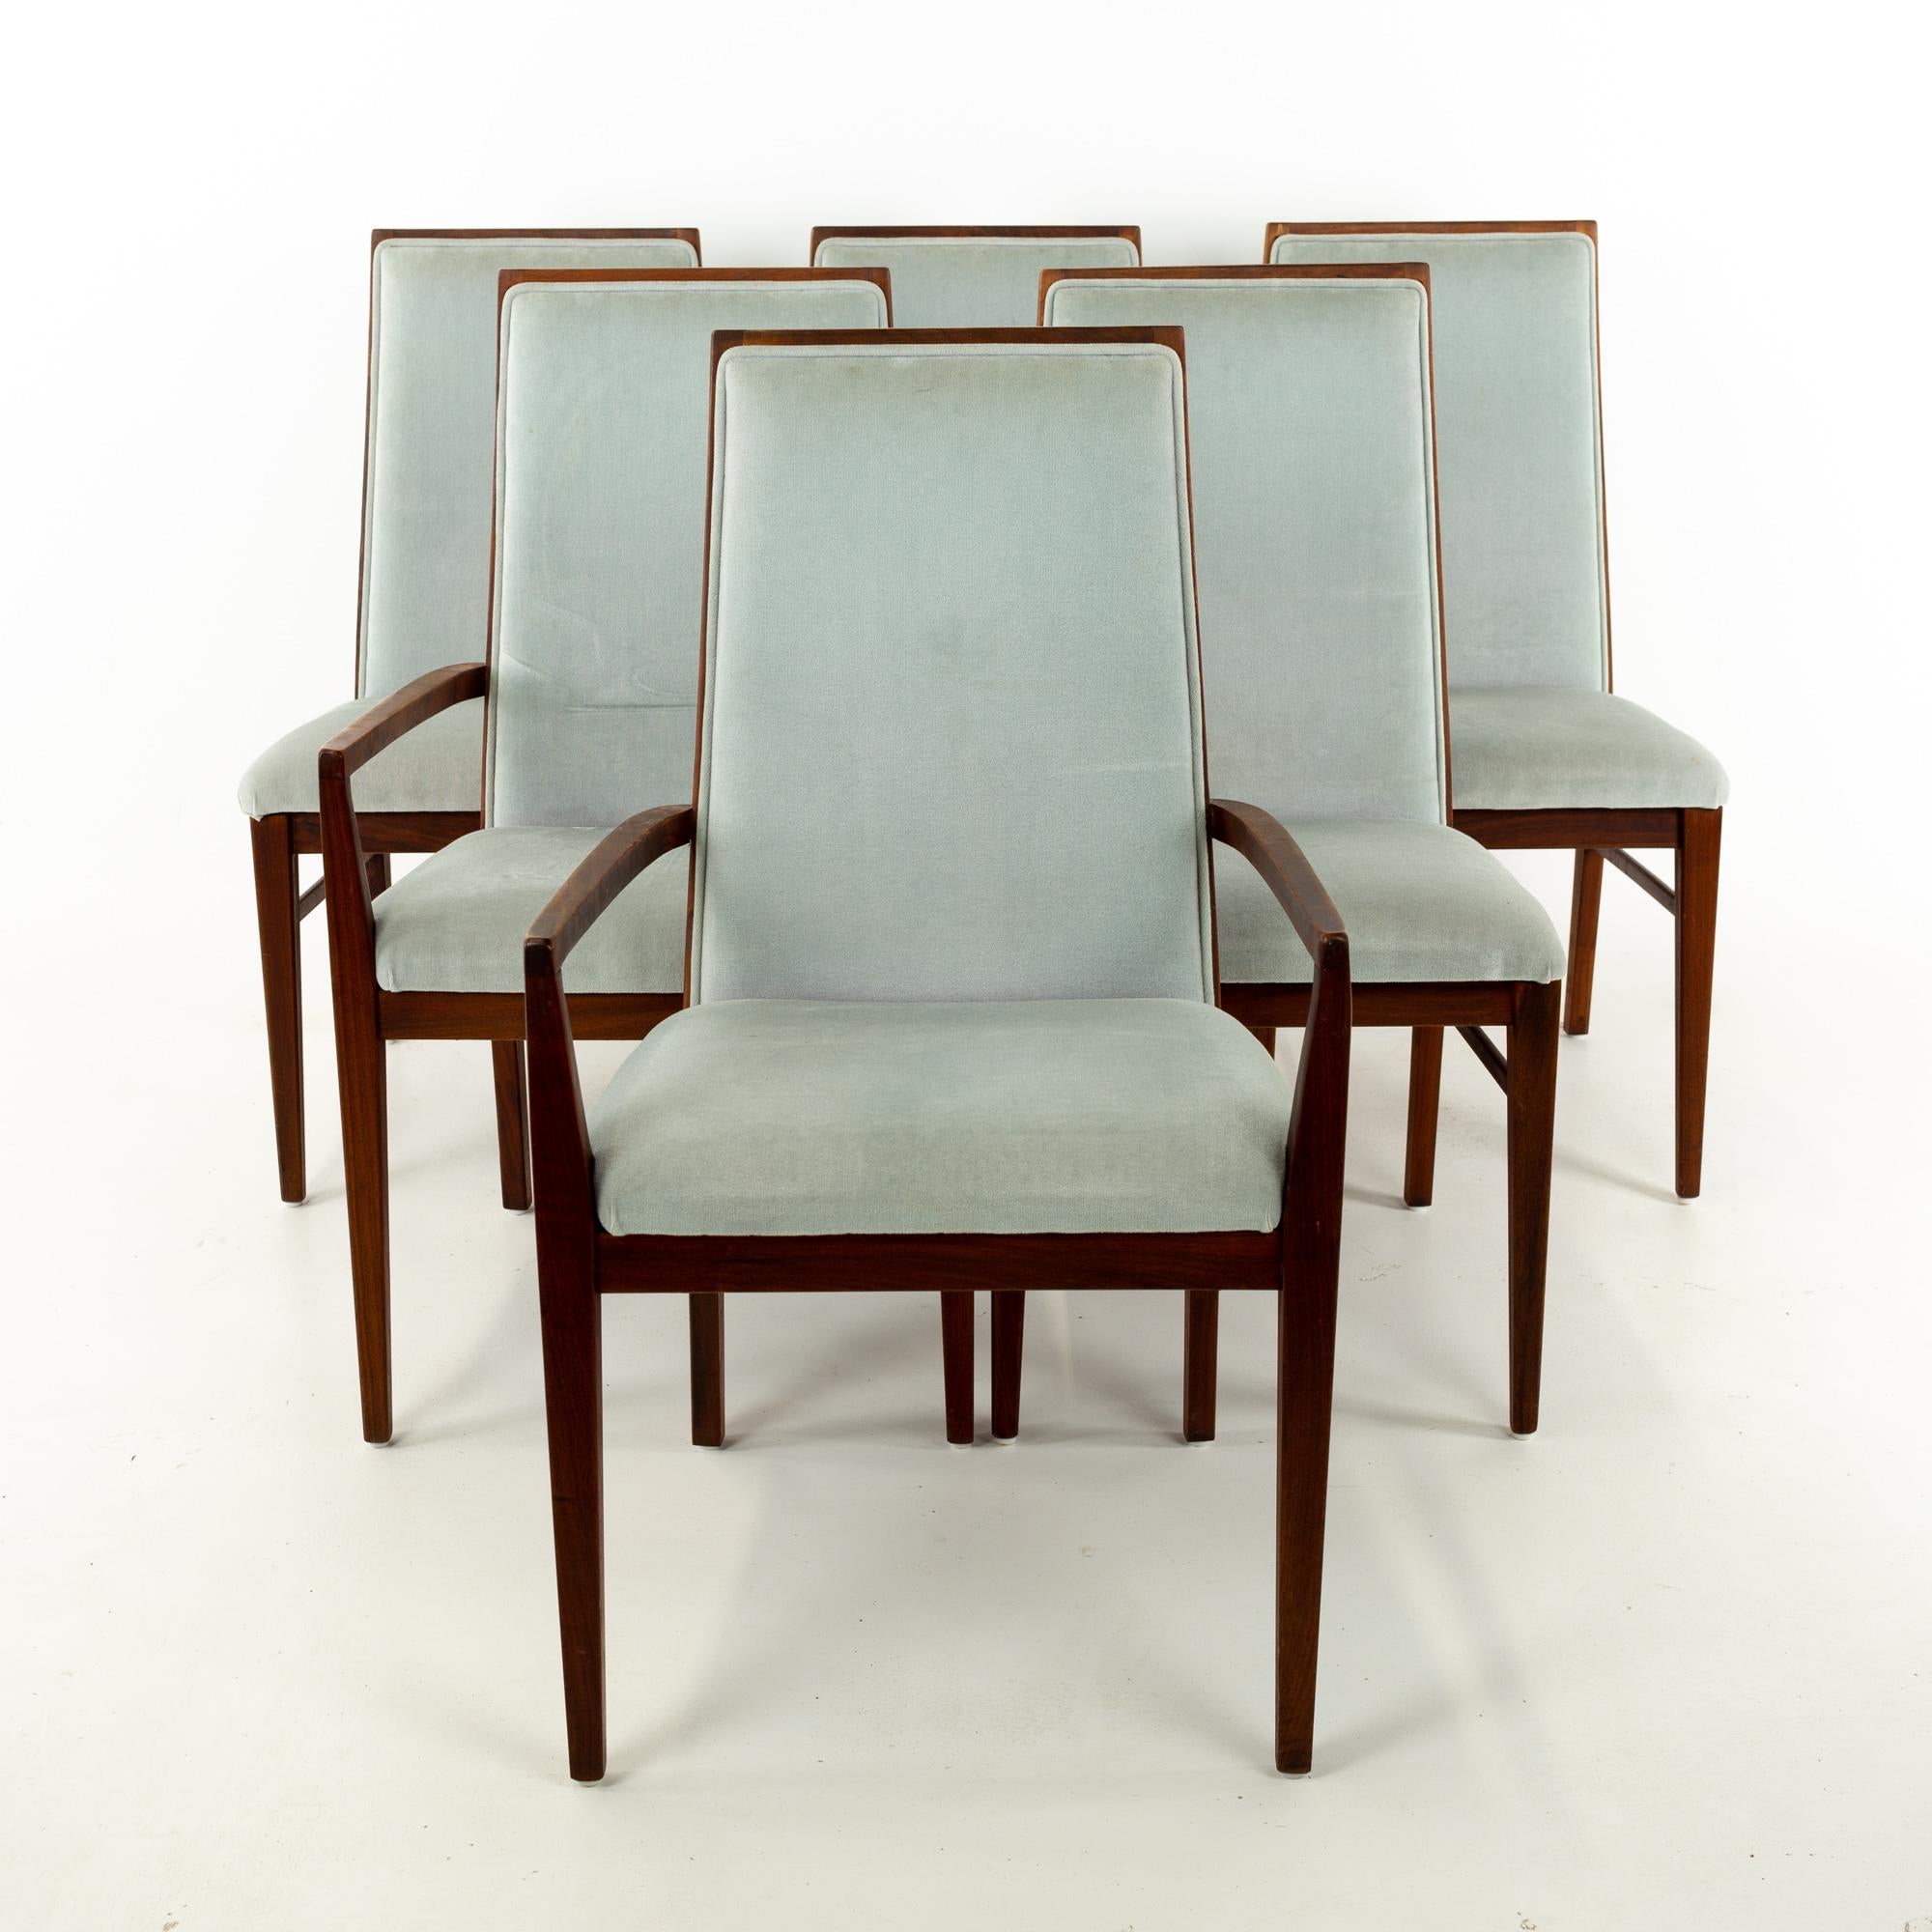 Merton Gershun for Dillingham Esprit midcentury walnut dining chairs, set of 6
These chairs are 19 wide x 21 deep x 37.5 inches high, with a seat height of 18.5 and arm height of 24 inches

This set is available in what we call restored vintage